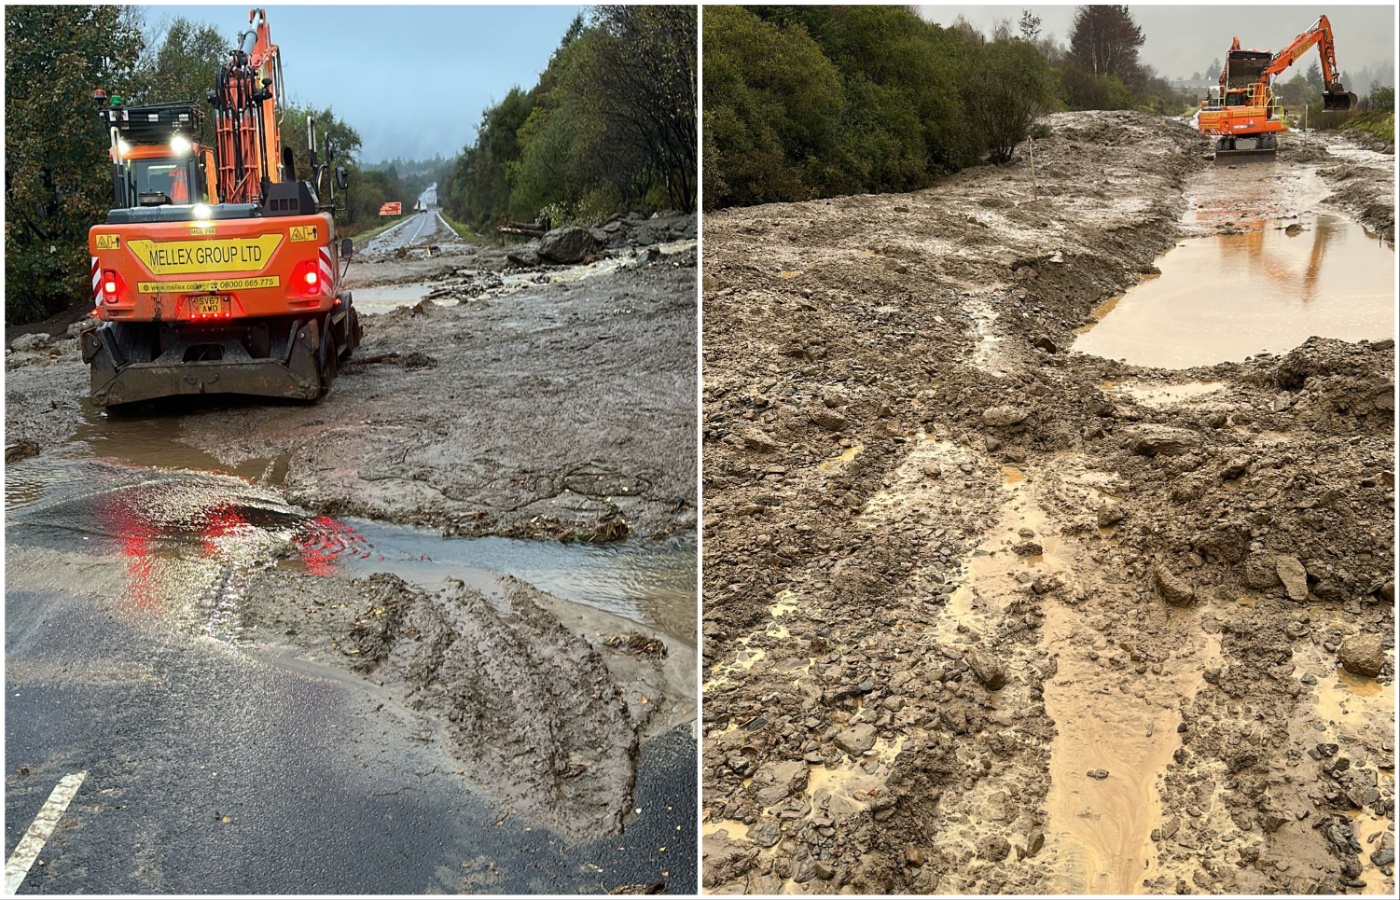 The A83 has been shut after landslides from severe weather.